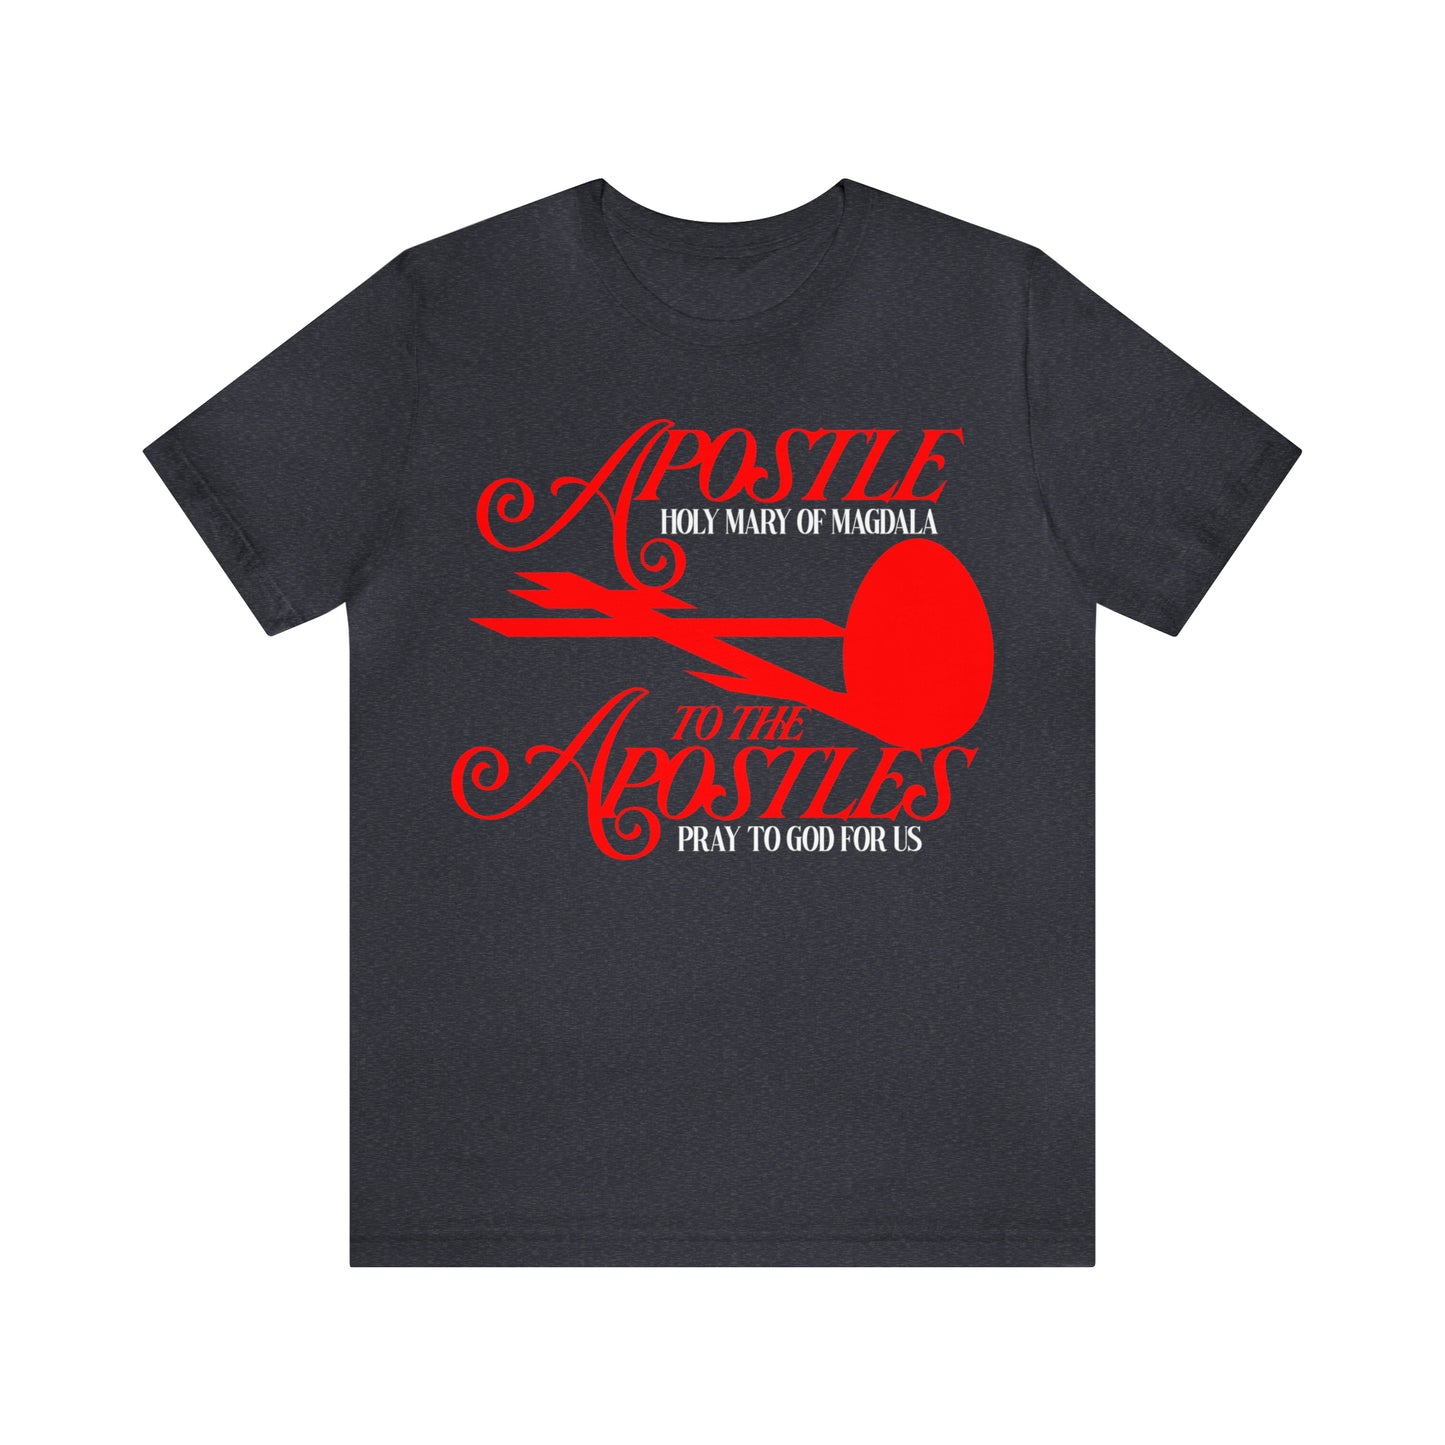 Apostle to the Apostles (St. Mary Magdalene) No. 1 | Orthodox Christian T-Shirt